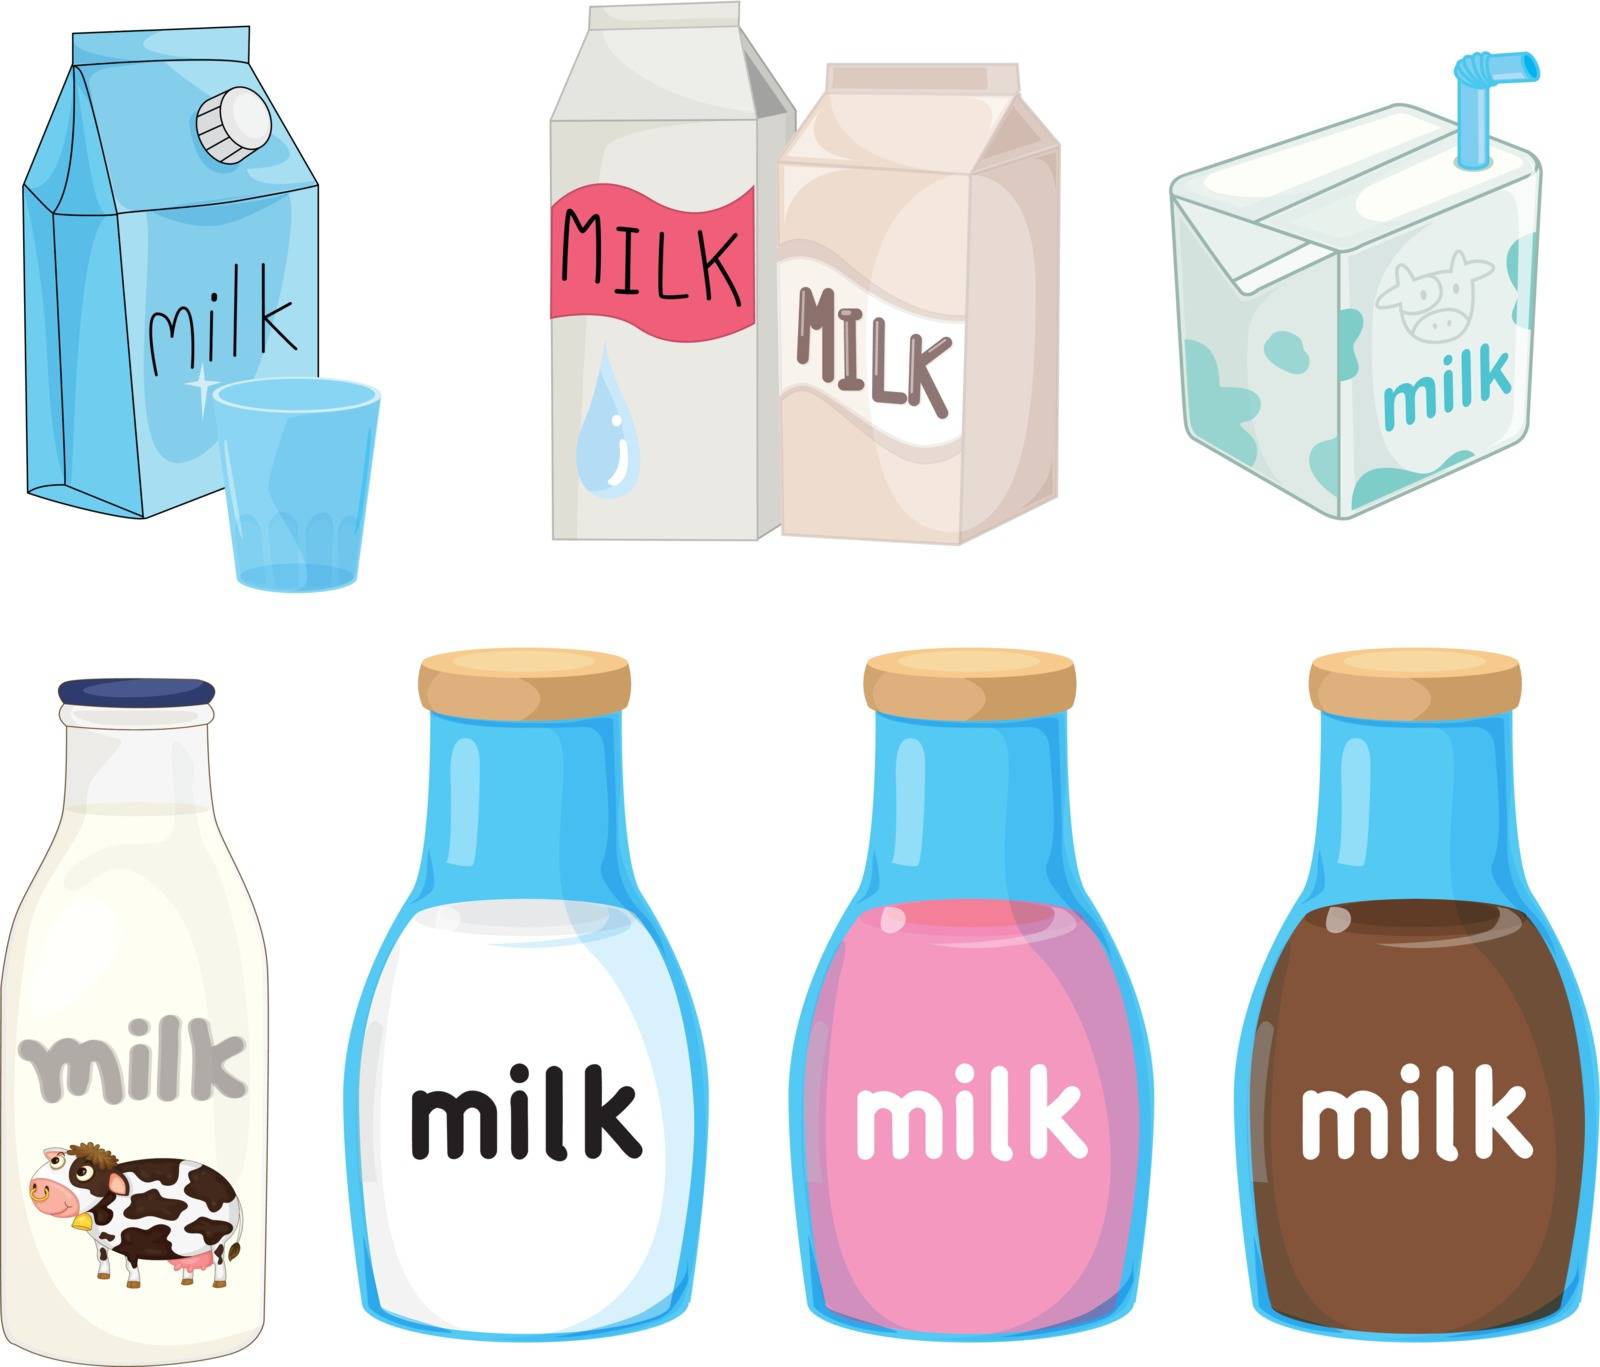 Milk collection by iimages